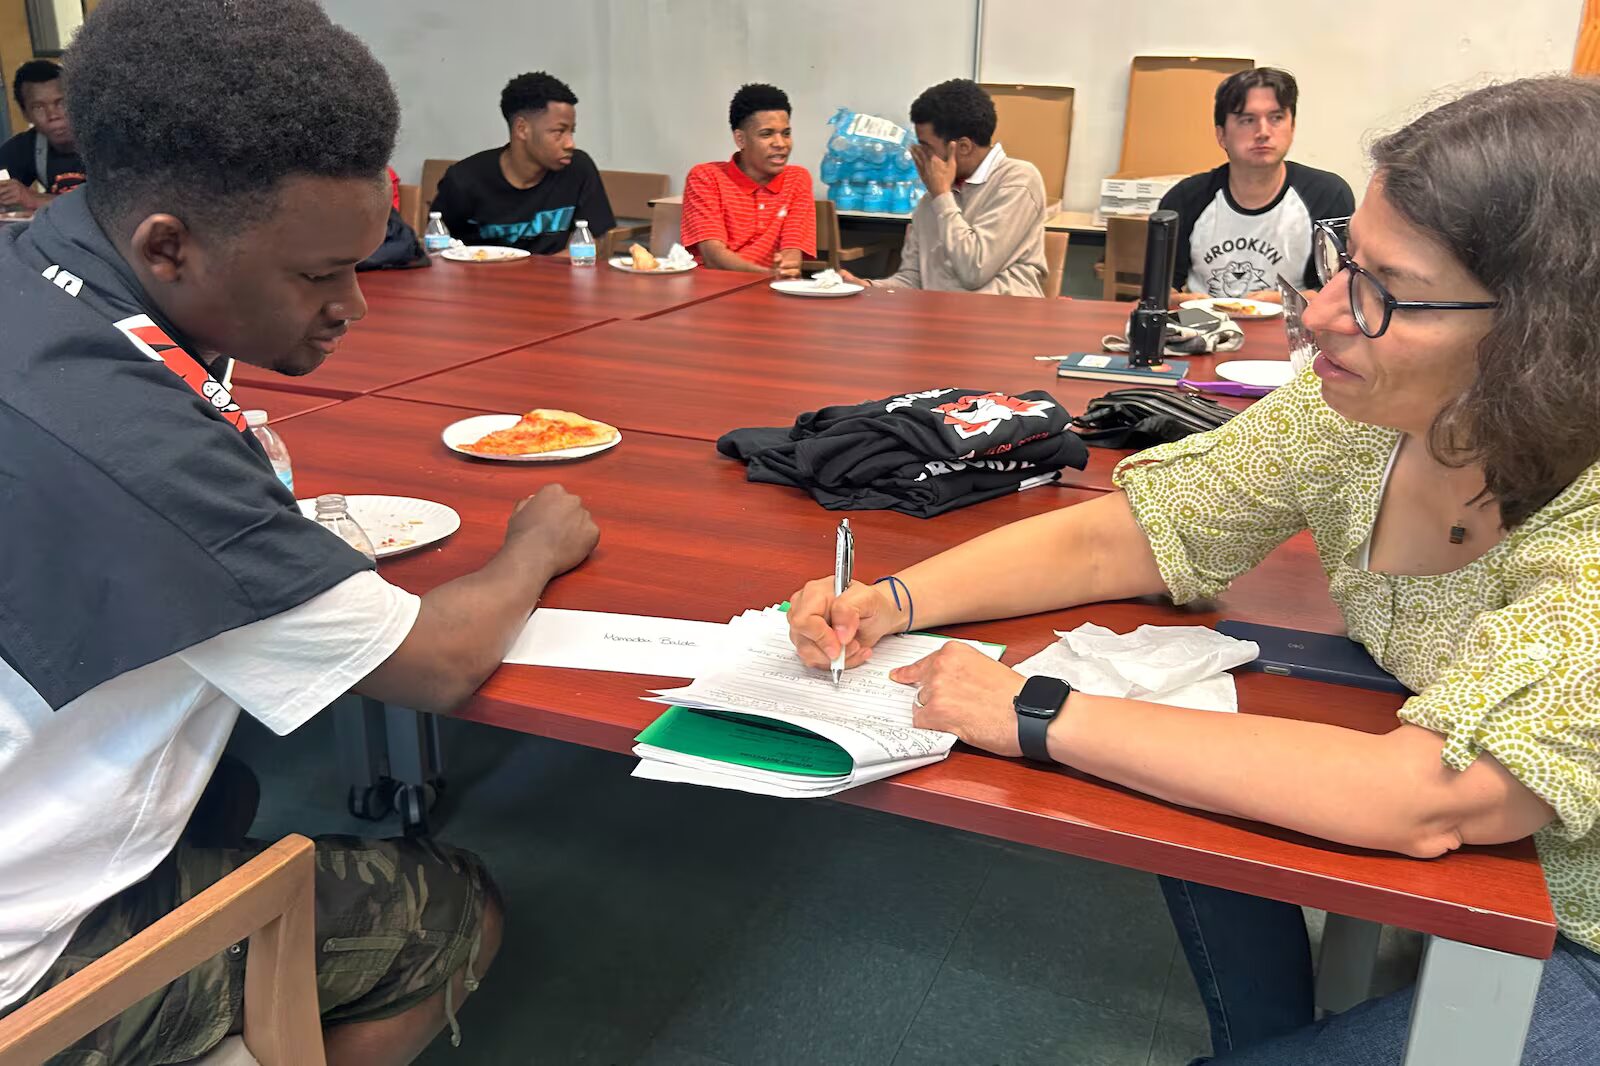 Older Immigrant students high school enrollment: Group of Black, male, older teens sit stound wood conference table with older brown-haired white woman helping one in foreground to fill out paperwork